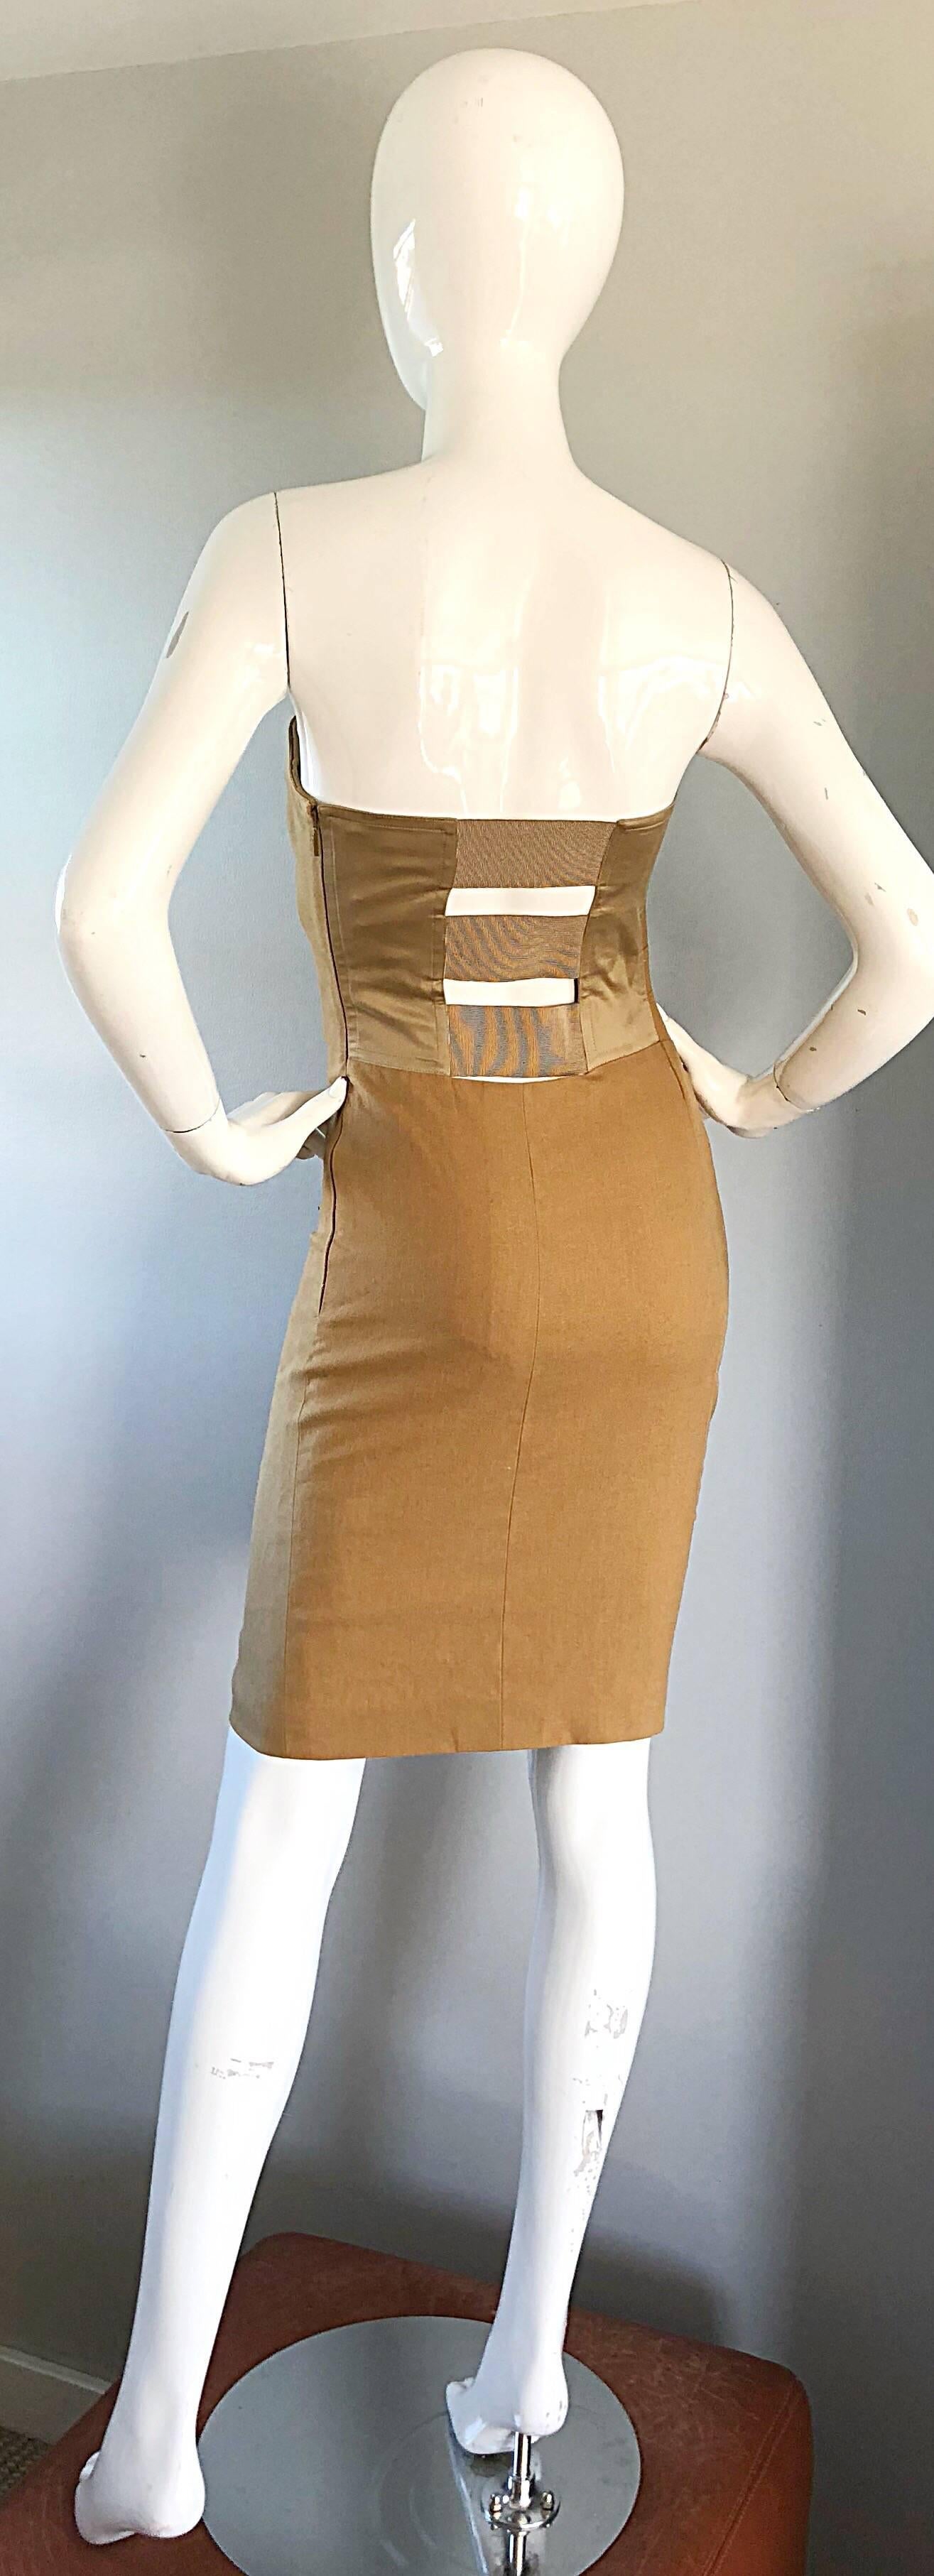 Gucci by Tom Ford Larger Size 48 12 1990s Tan Camel Cage Back 90s Vintage Dress  For Sale 1